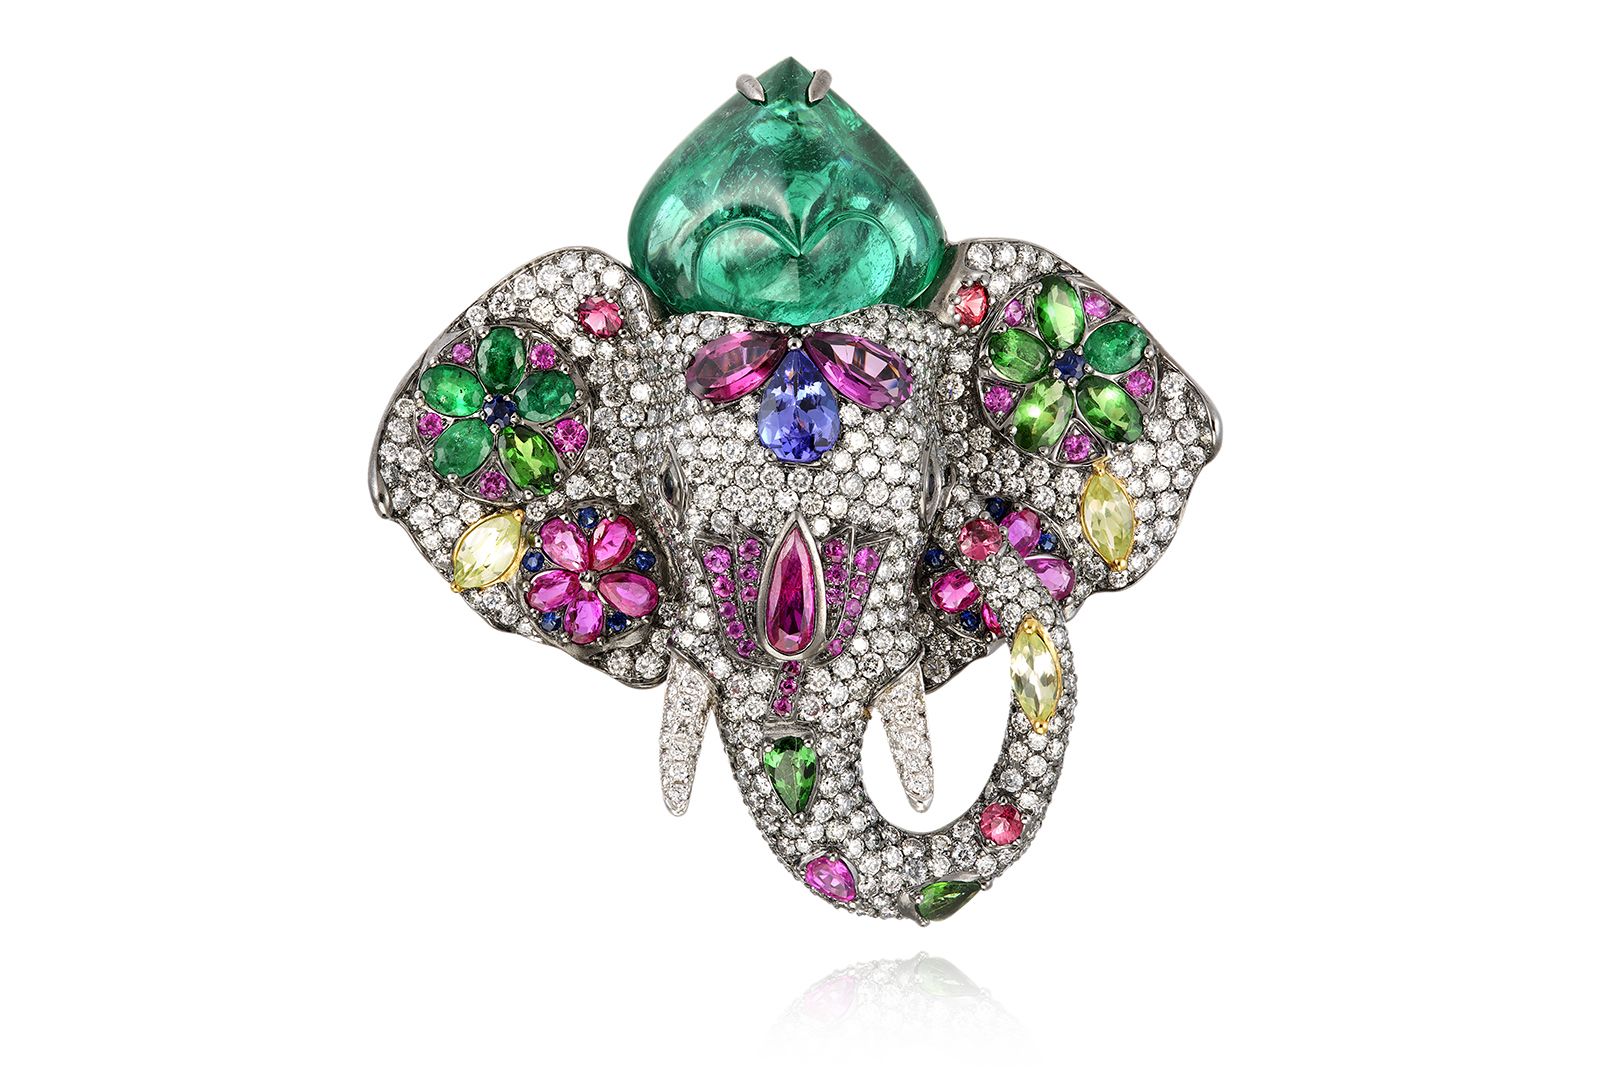 Lydia Courteille Diwali ring in coloured gemstones, carved emerald and diamond from the Indian Song High Jewellery collection